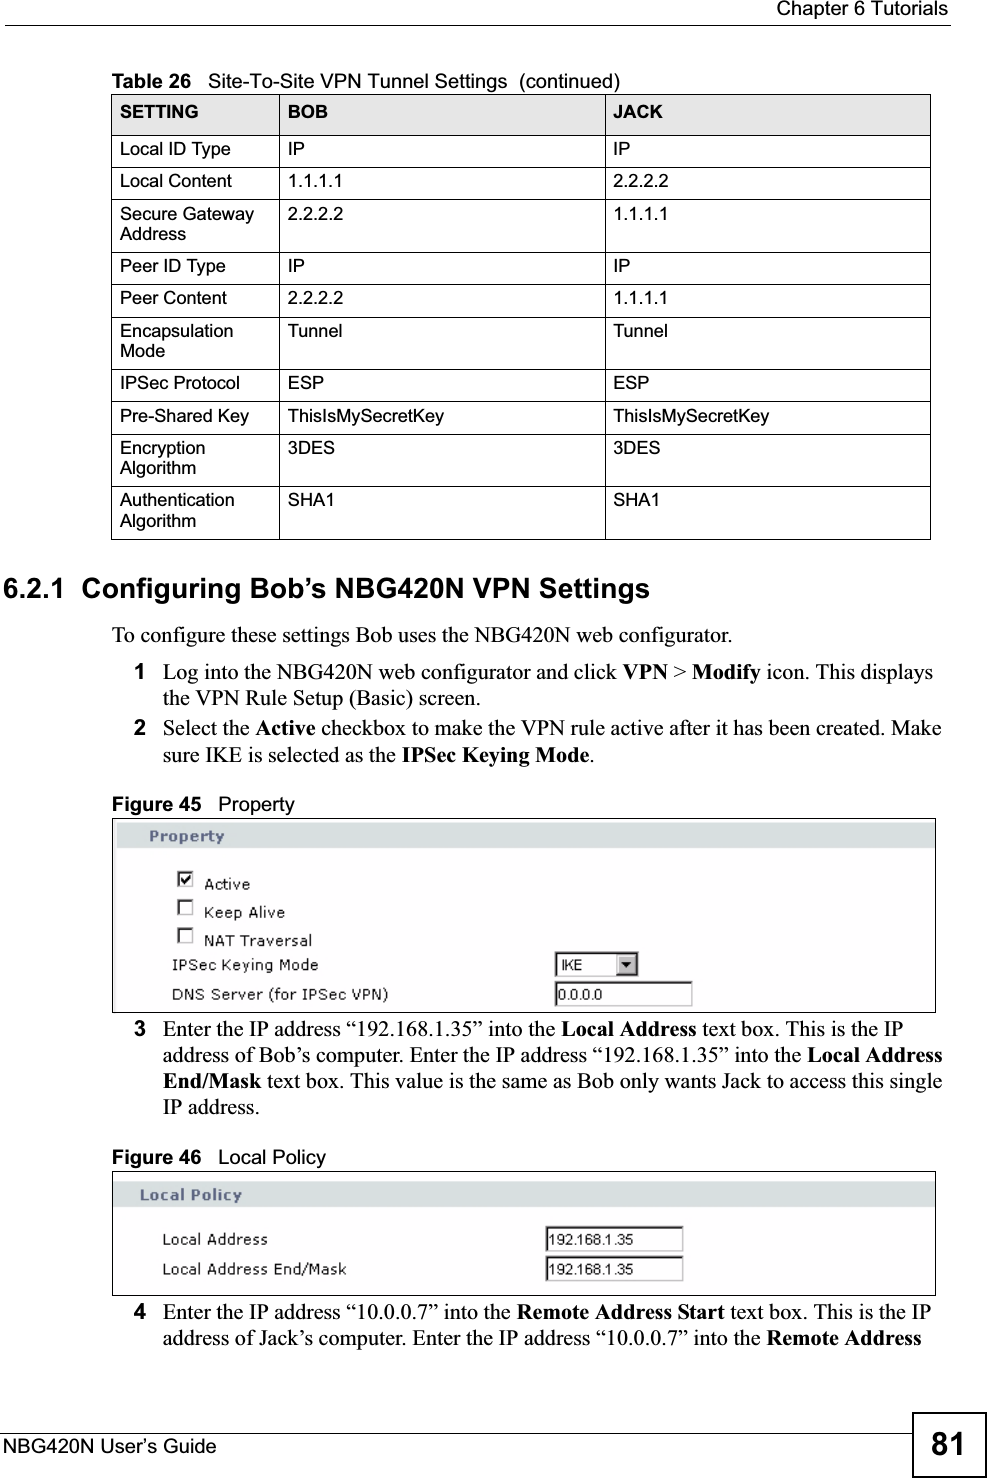  Chapter 6 TutorialsNBG420N User’s Guide 816.2.1  Configuring Bob’s NBG420N VPN SettingsTo configure these settings Bob uses the NBG420N web configurator.1Log into the NBG420N web configurator and click VPN &gt; Modify icon. This displays the VPN Rule Setup (Basic) screen.2Select the Active checkbox to make the VPN rule active after it has been created. Make sure IKE is selected as the IPSec Keying Mode.Figure 45   Property3Enter the IP address “192.168.1.35” into the Local Address text box. This is the IP address of Bob’s computer. Enter the IP address “192.168.1.35” into the Local Address End/Mask text box. This value is the same as Bob only wants Jack to access this single IP address.Figure 46   Local Policy4Enter the IP address “10.0.0.7” into the Remote Address Start text box. This is the IP address of Jack’s computer. Enter the IP address “10.0.0.7” into the Remote Address Local ID Type IP IPLocal Content 1.1.1.1 2.2.2.2Secure Gateway Address2.2.2.2 1.1.1.1Peer ID Type IP IPPeer Content 2.2.2.2 1.1.1.1Encapsulation ModeTunnel TunnelIPSec Protocol ESP ESPPre-Shared Key ThisIsMySecretKey ThisIsMySecretKeyEncryption Algorithm3DES 3DESAuthentication AlgorithmSHA1 SHA1Table 26   Site-To-Site VPN Tunnel Settings  (continued)SETTING BOB JACK